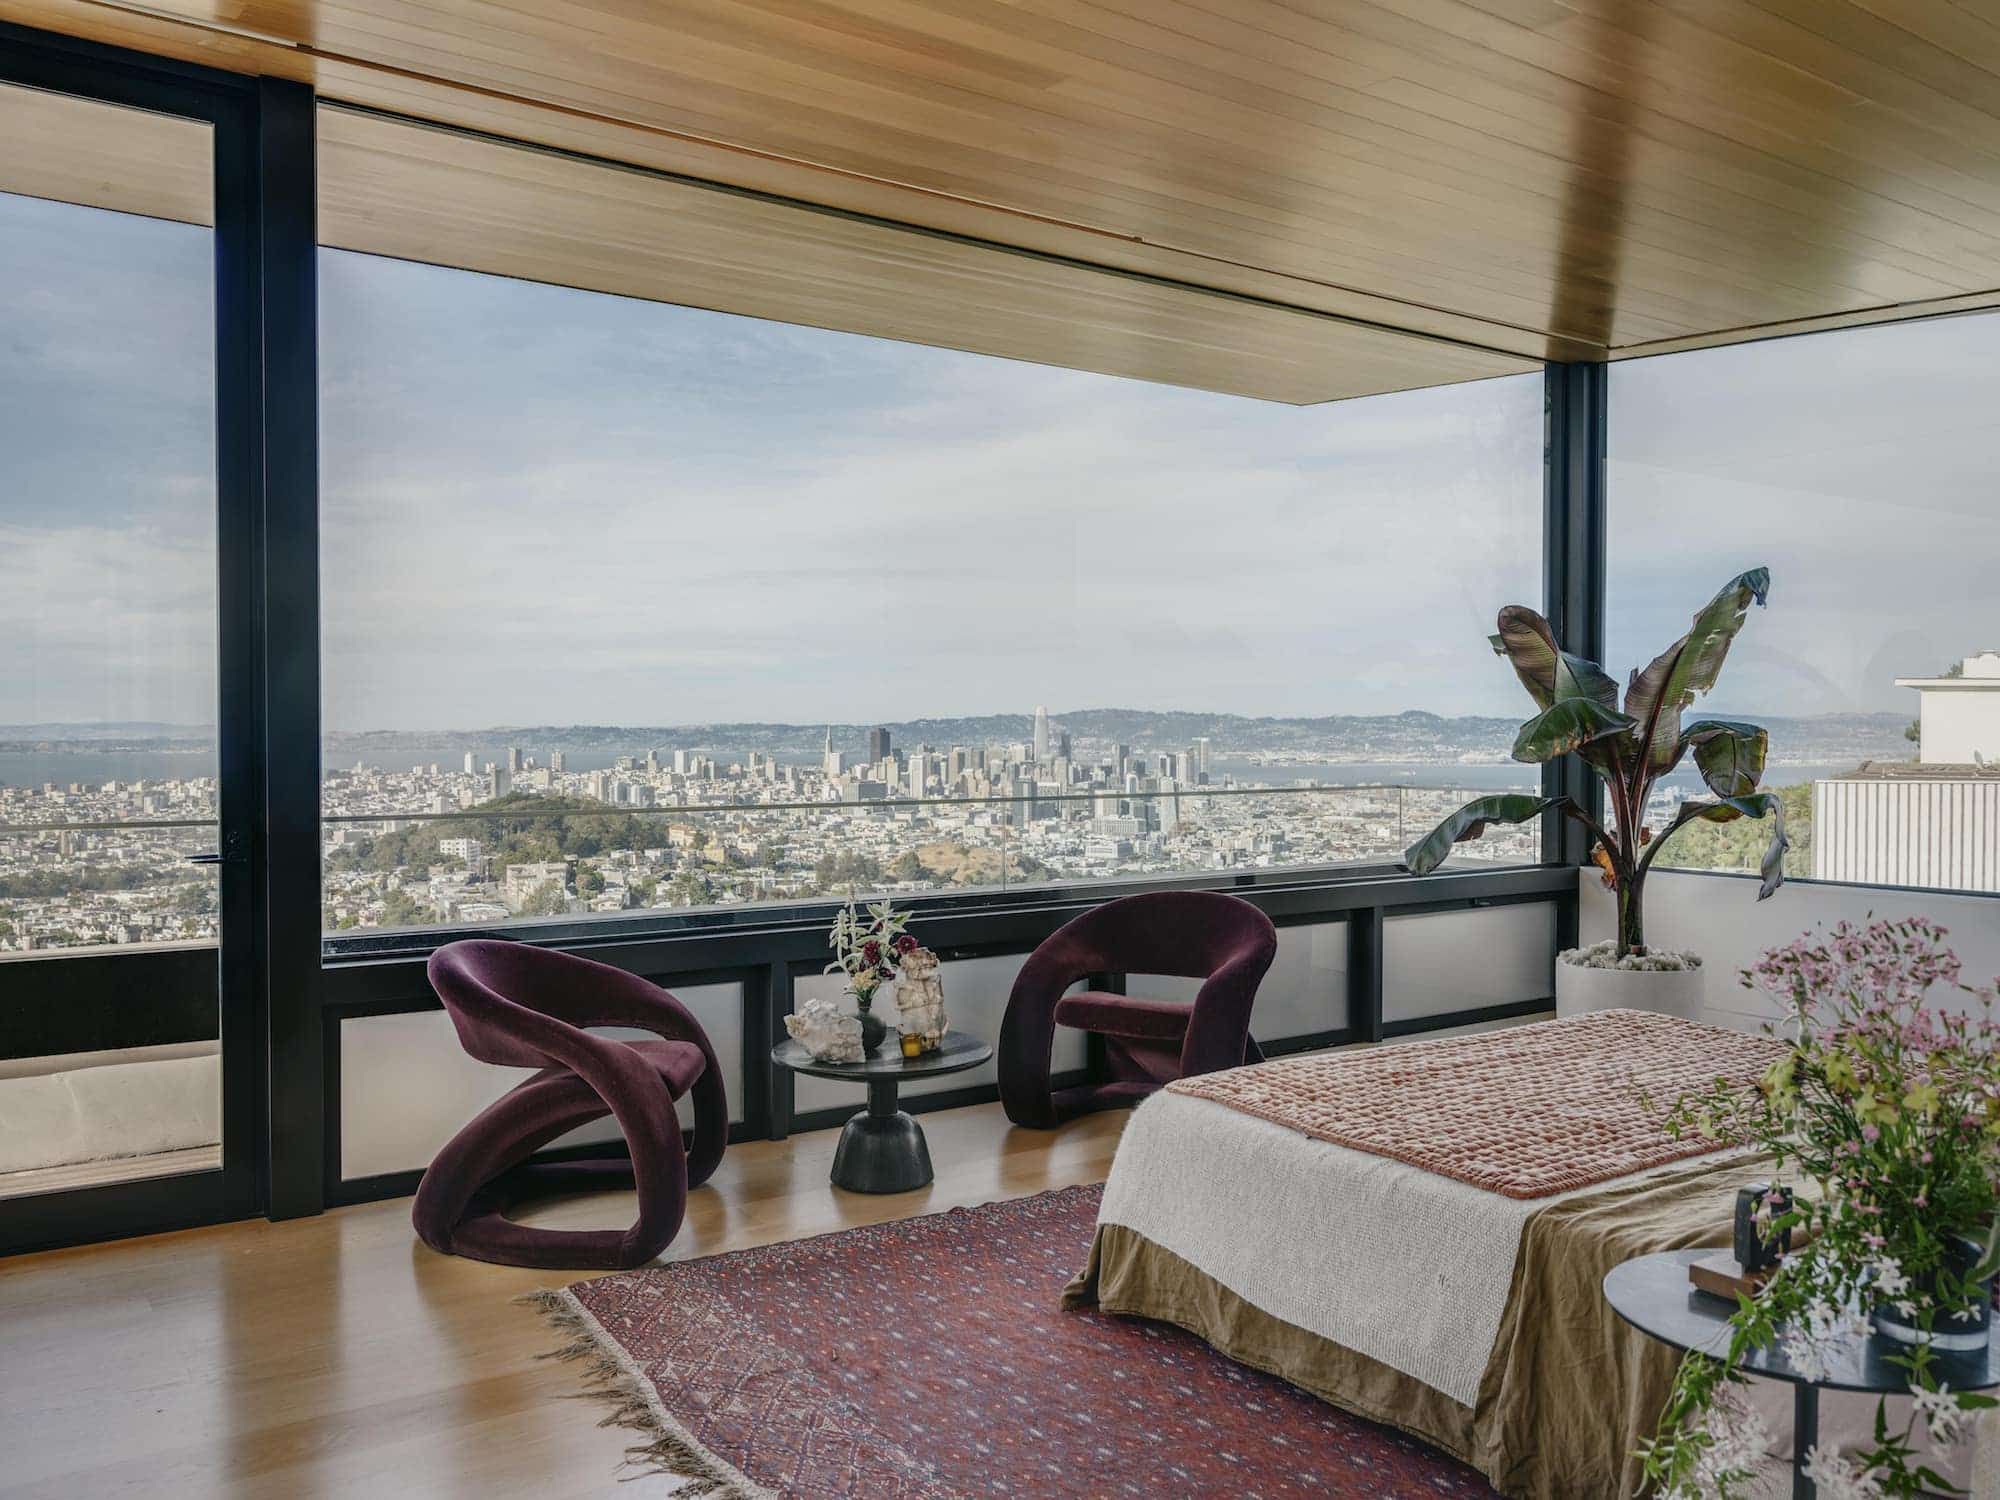 11 Bedrooms with Incredible Views